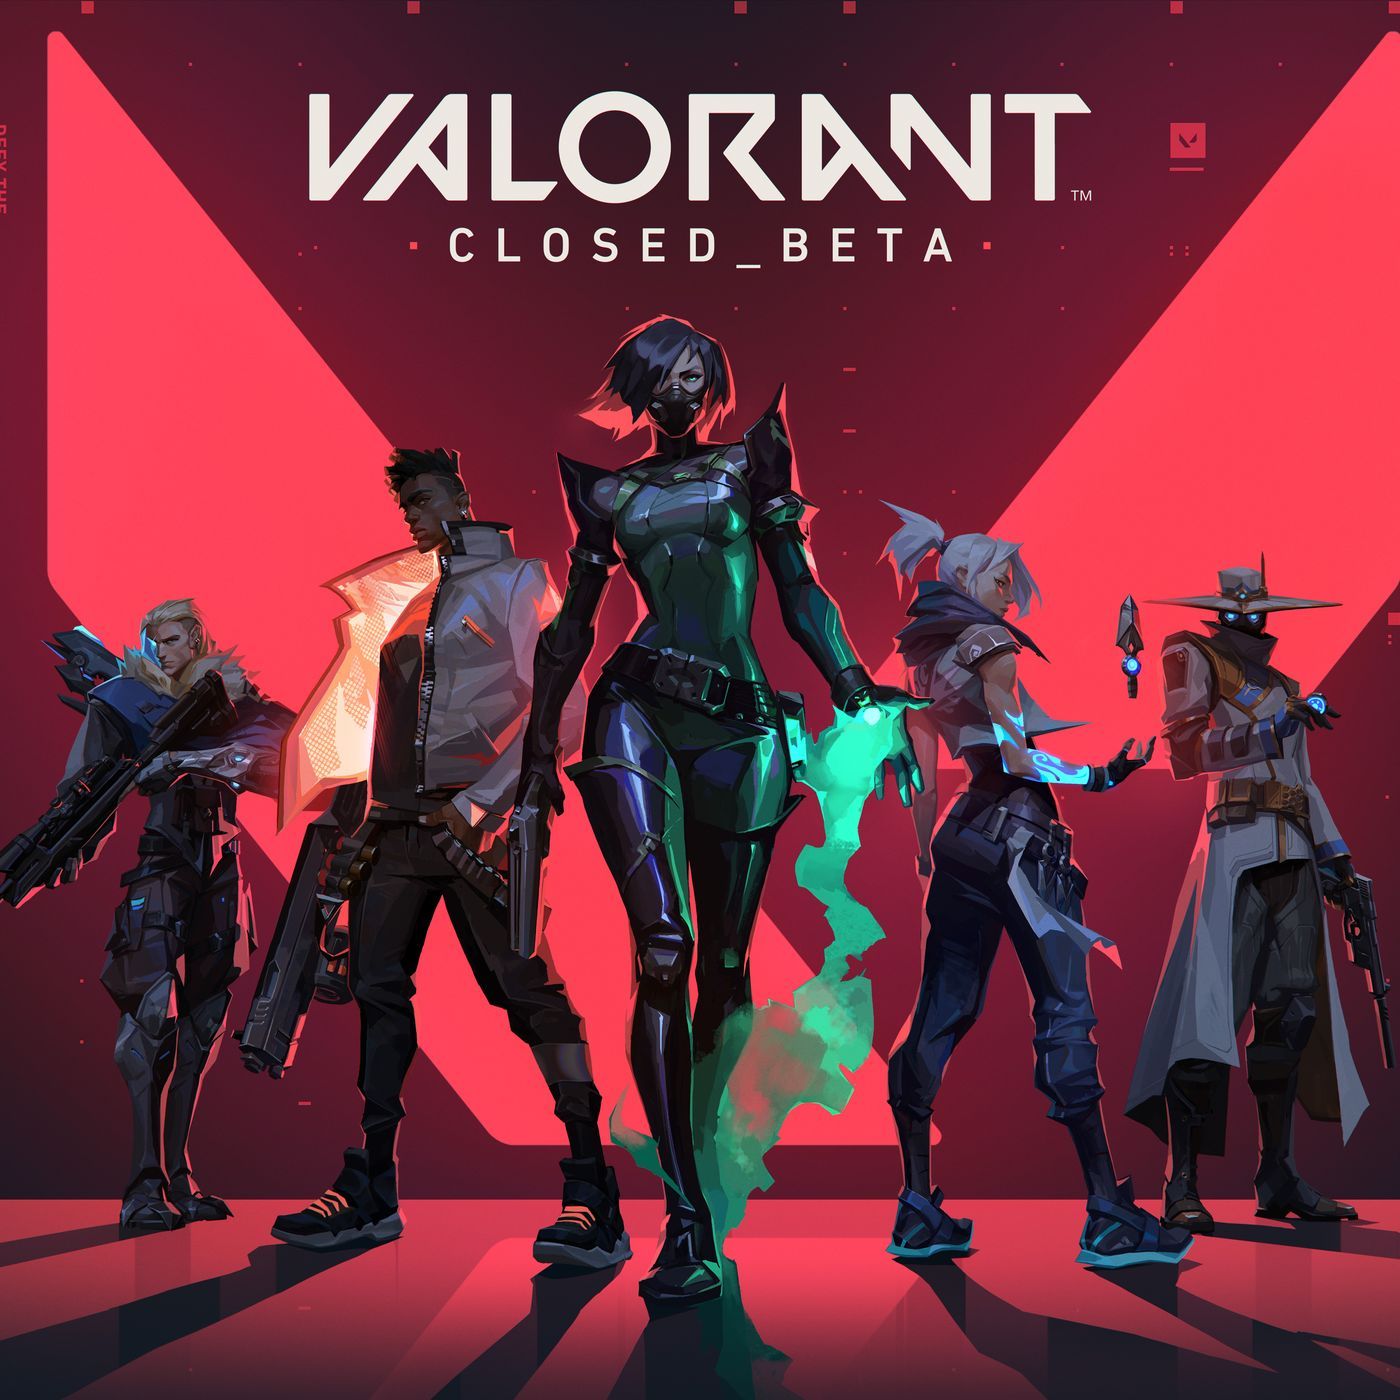 Riot's shooter Valorant goes into beta on April 7th